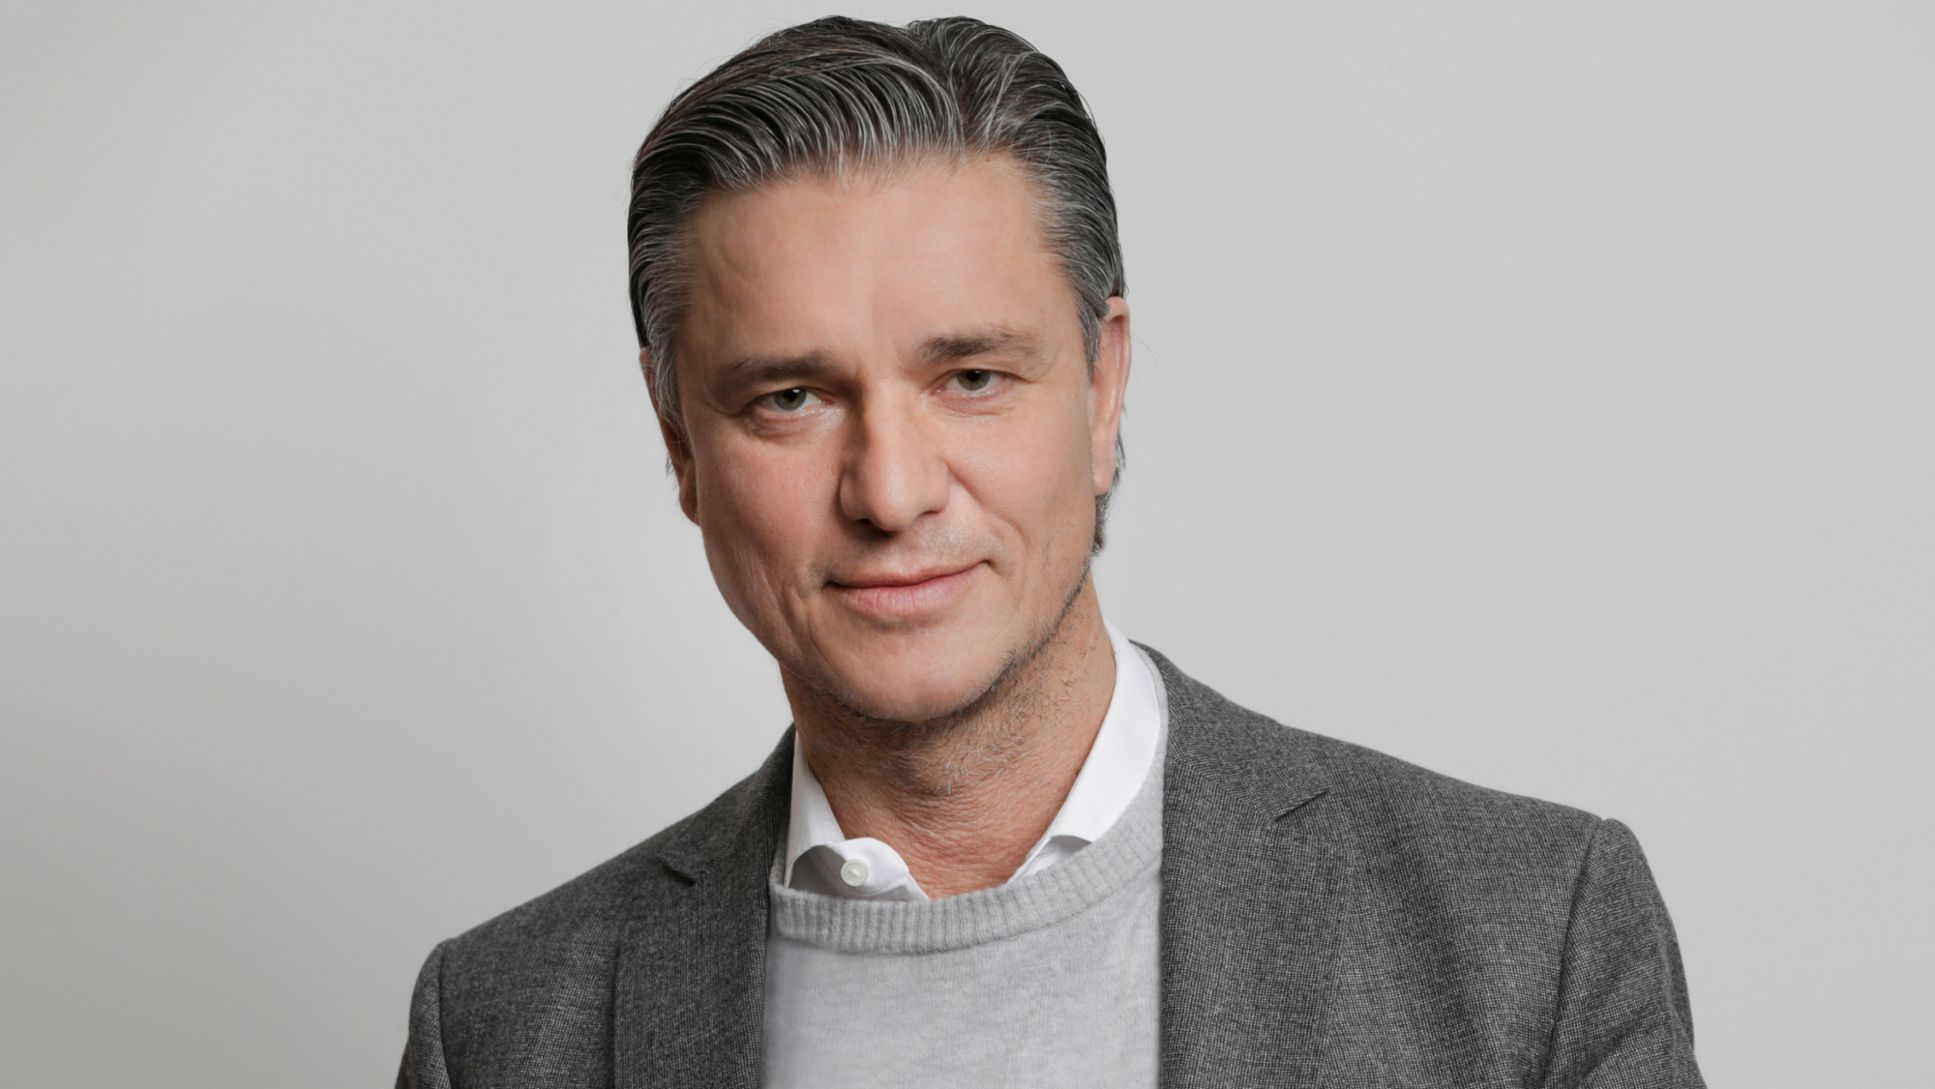 Lutz Meschke, Deputy Chairman and Member of the Executive Board responsible for Finance and IT, 2020, Porsche AG